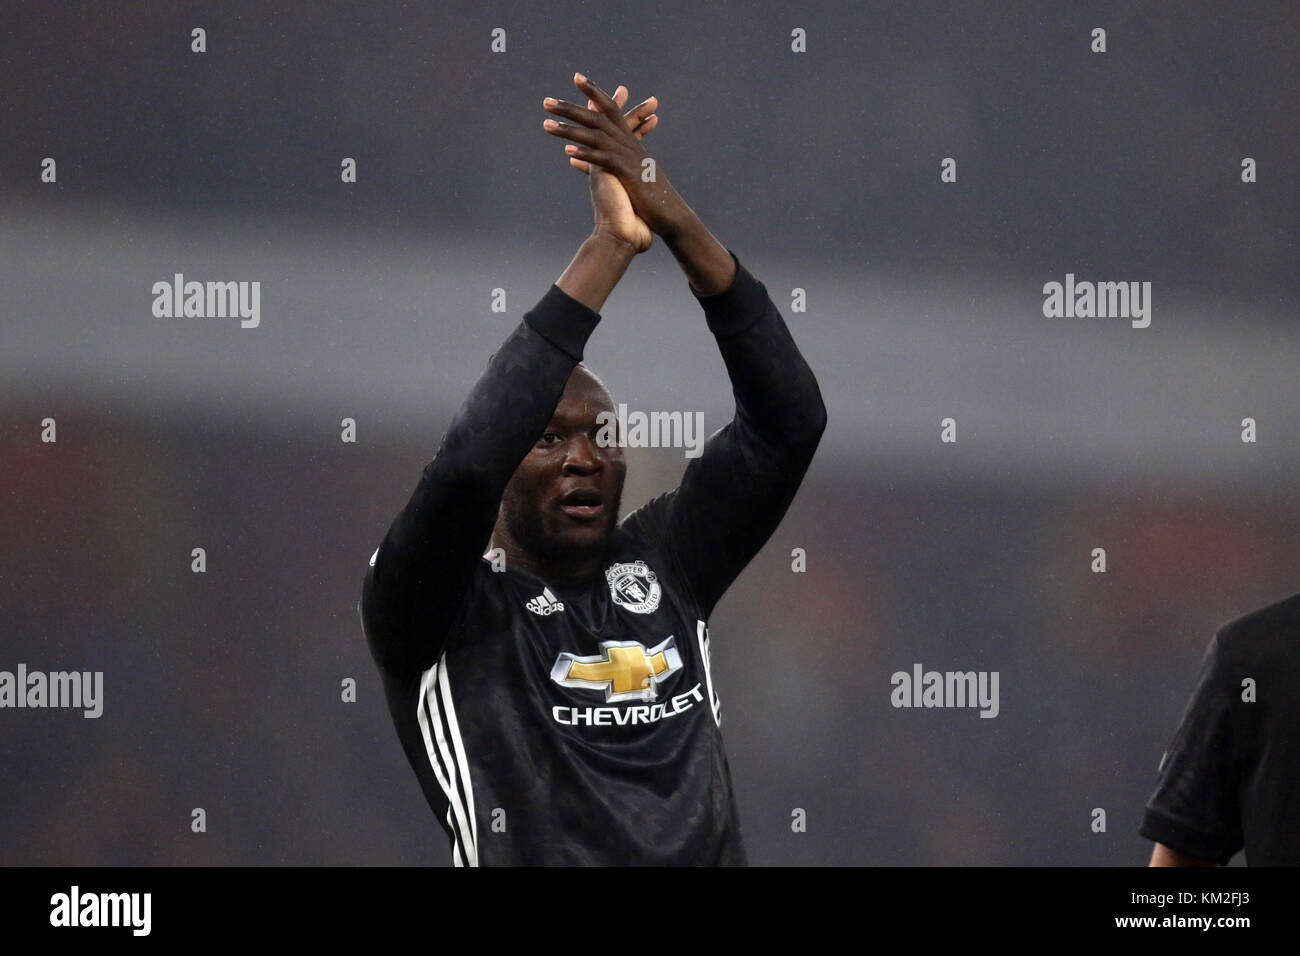 London, UK. 02nd Dec, 2017. Romelu Lukaku (MU) at the English Premier League match Arsenal v Manchester United, at The Emirates Stadium, London, on December 2, 2017. **This picture is intended for editorial use only** Credit: Paul Marriott/Alamy Live News Stock Photo